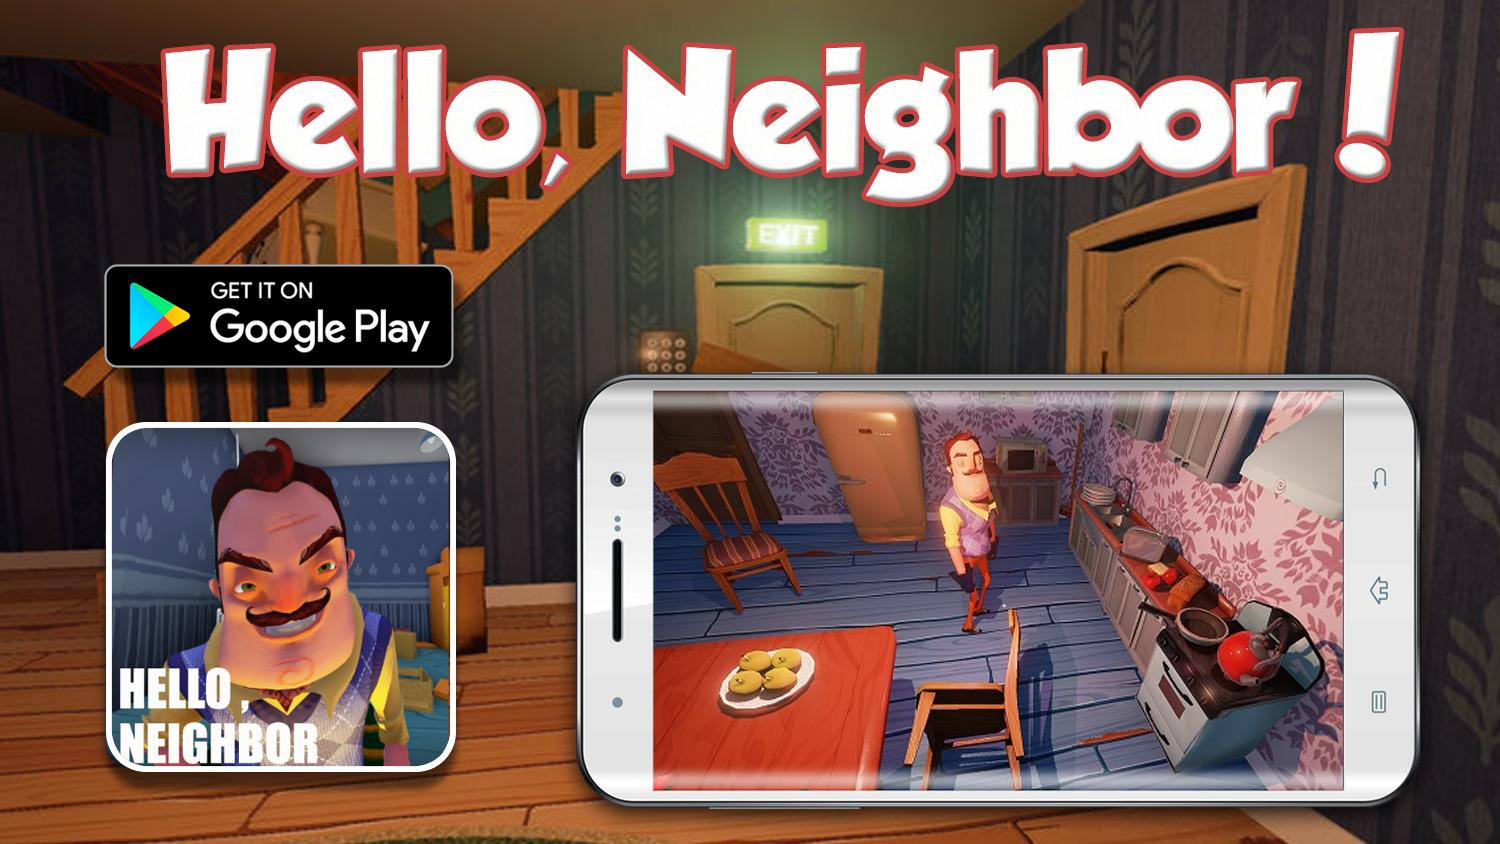 Consejos Hola Neighbor Roblox 2018 Game Free V2 For Android - games roblox 2018